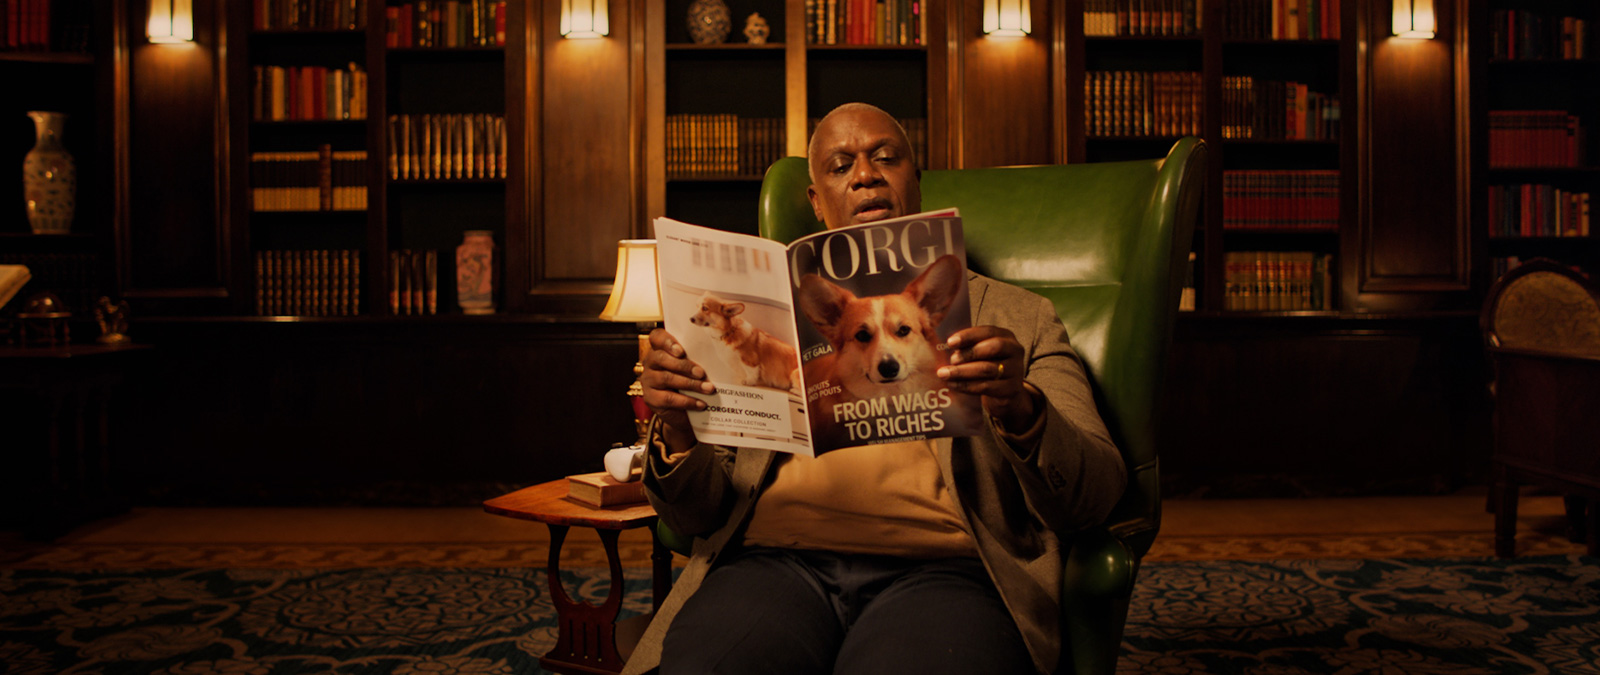 Andre Braugher reads Corgi magazine. FROM WAGS TO RICHES.